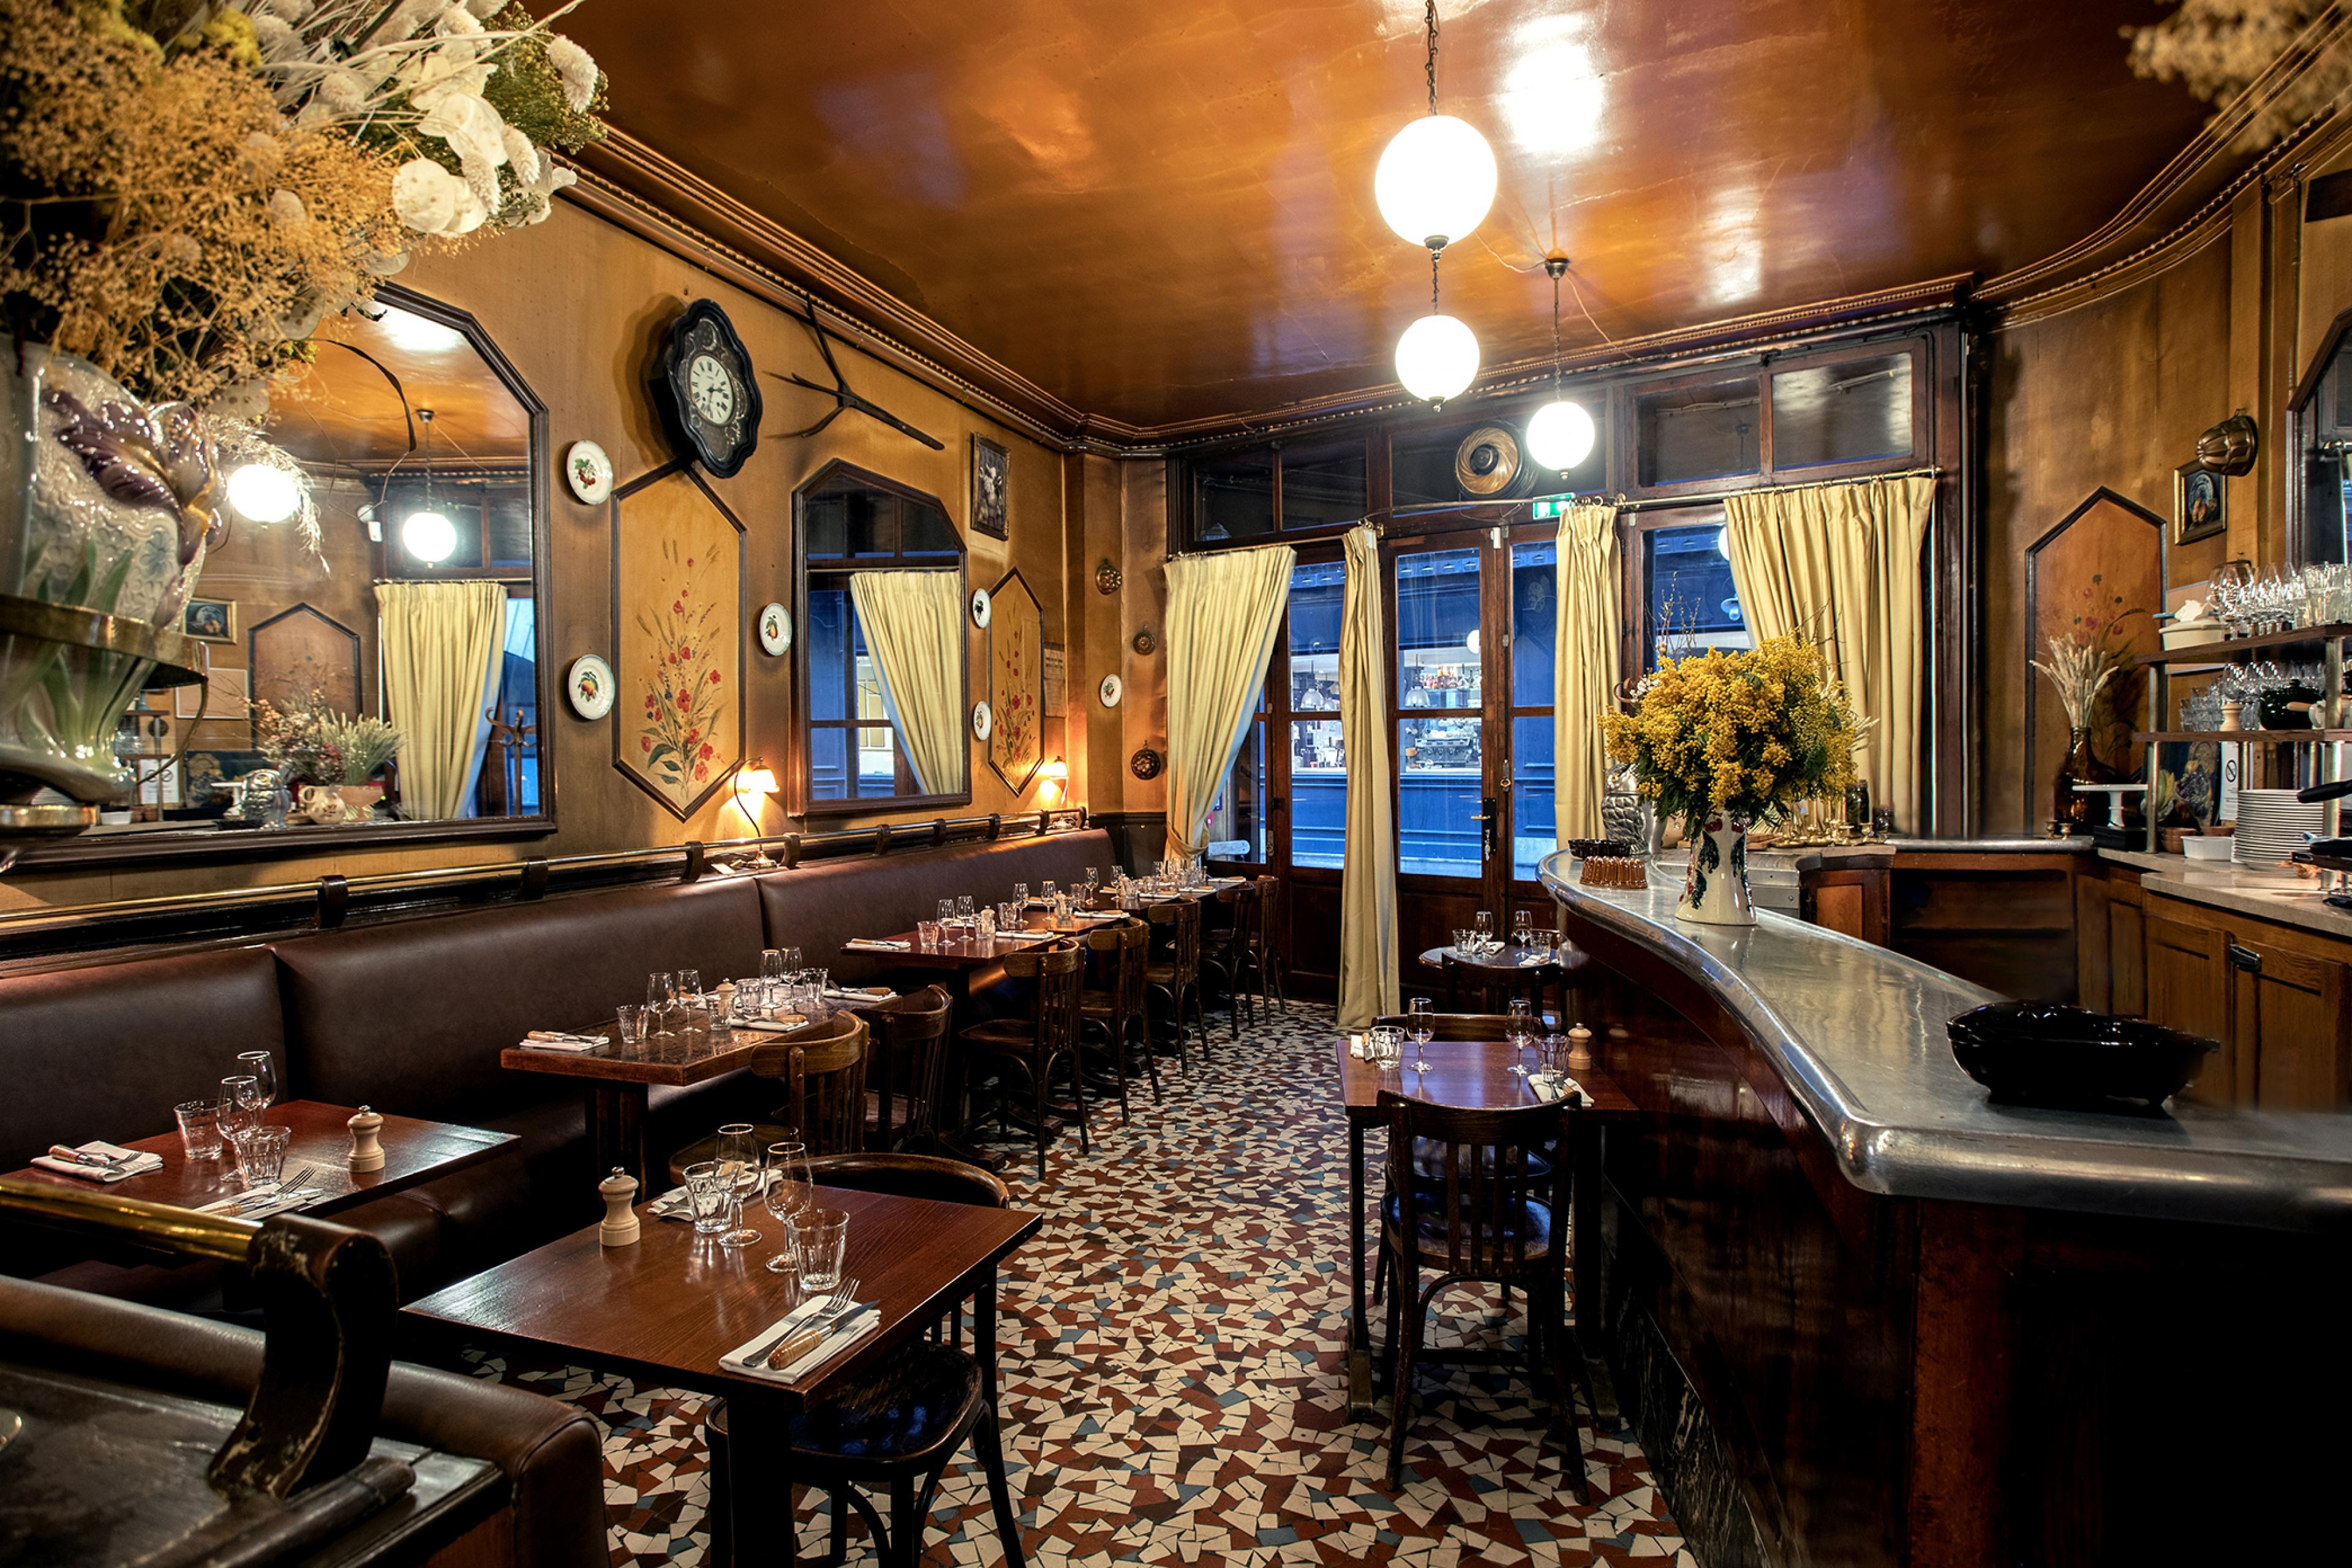 interior of paris brasserie with traditional decor and a bar